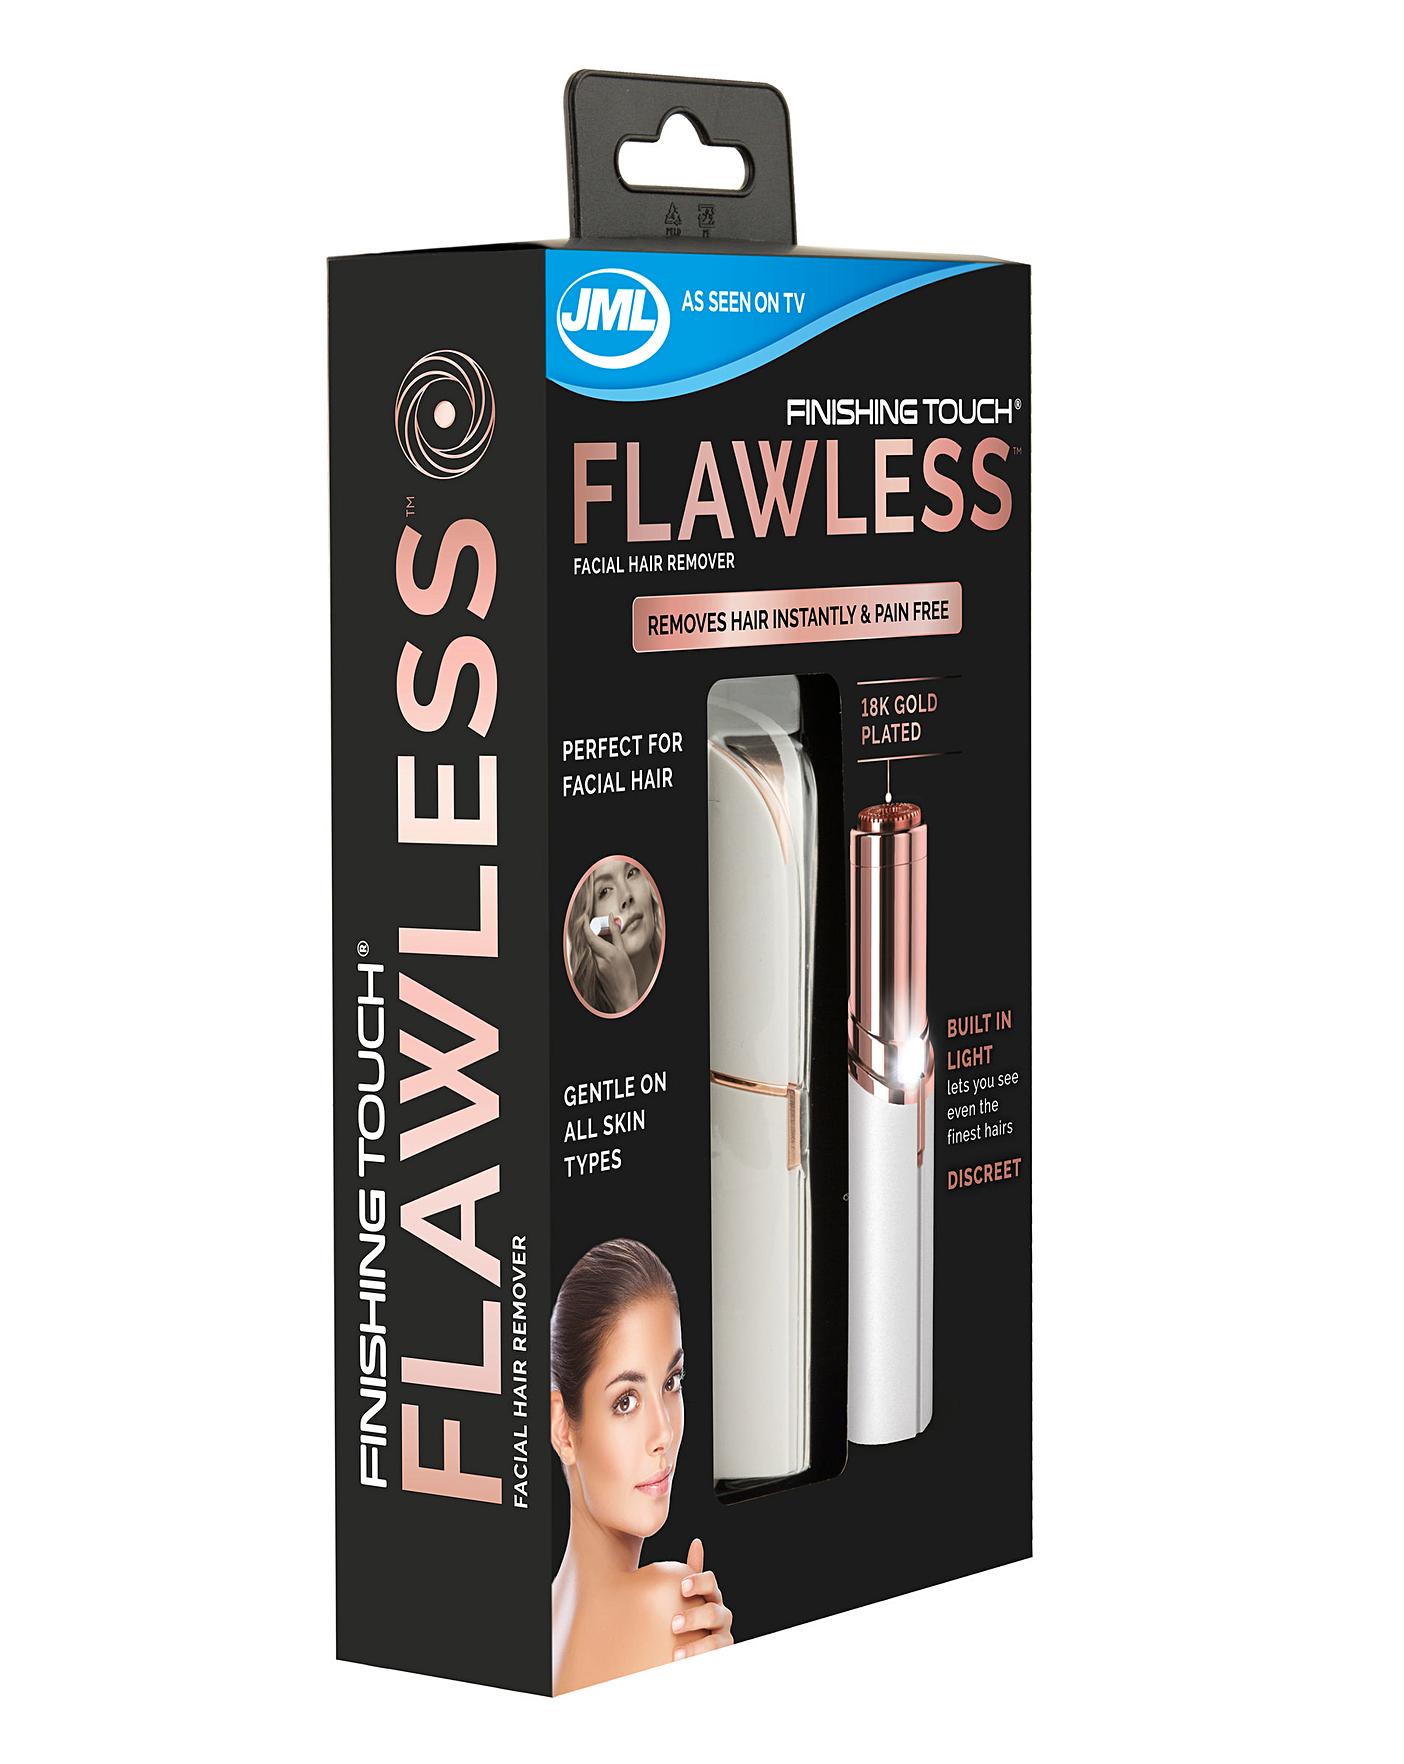 Finishing touch flawless facial hair remover as seen on tv Jml Finishing Touch Facial Hair Remover Ambrose Wilson